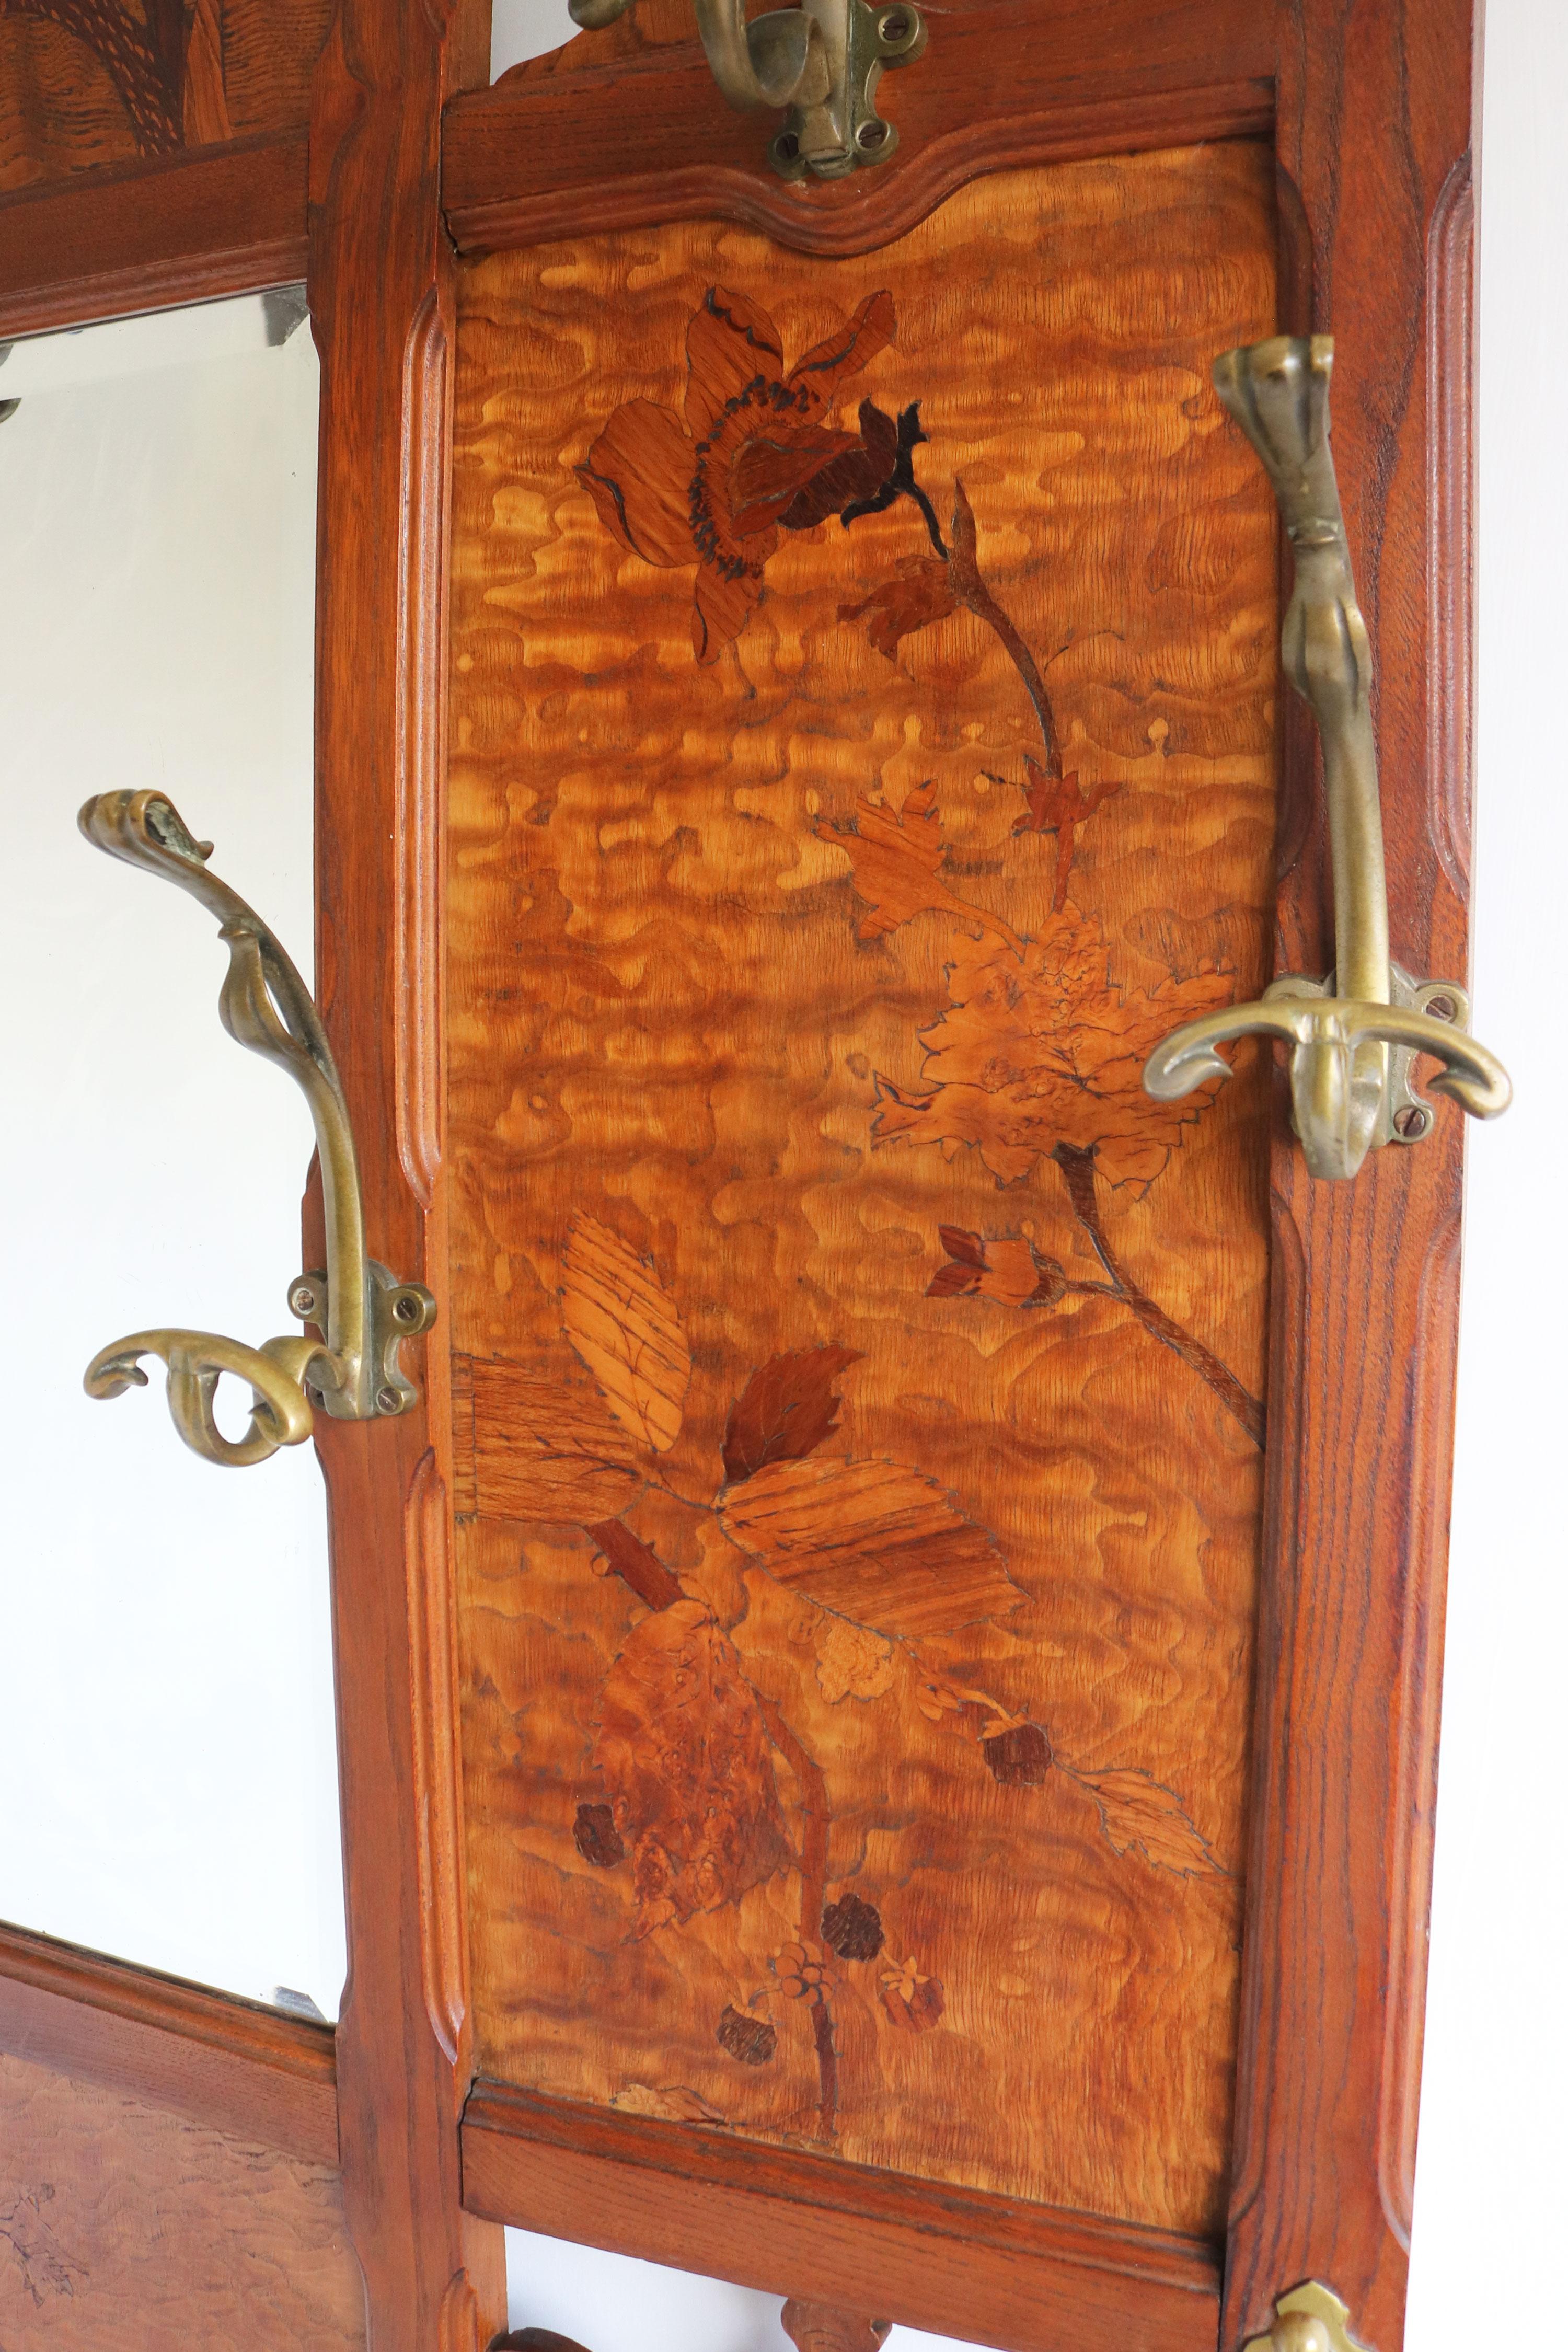 French Art nouveau hall tree / coat rack by Emile galle 1905 marquetry hallway For Sale 6